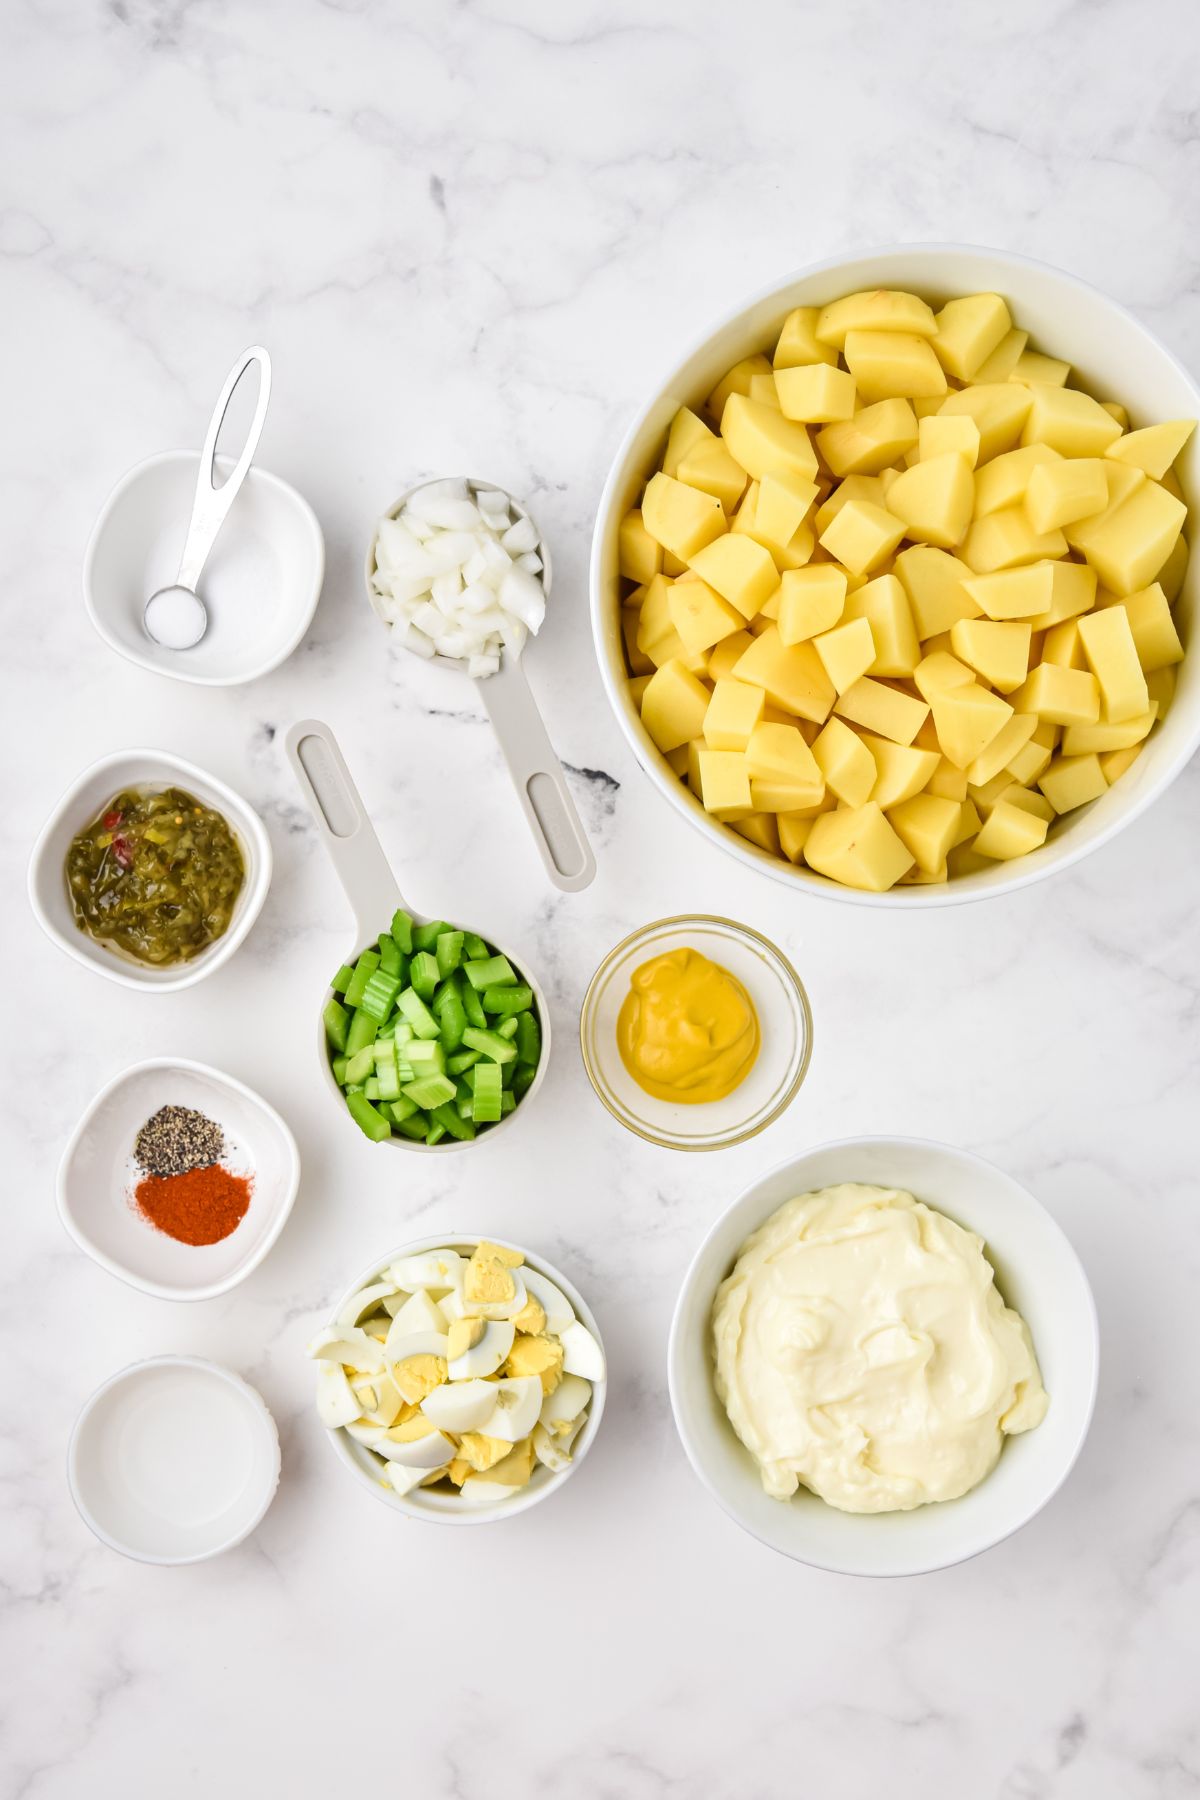 ingredients on white counter: diced potatoes, mustard, mayonnaise, chopped celery, chopped hard boiled eggs, relish, vinegar, and seasings